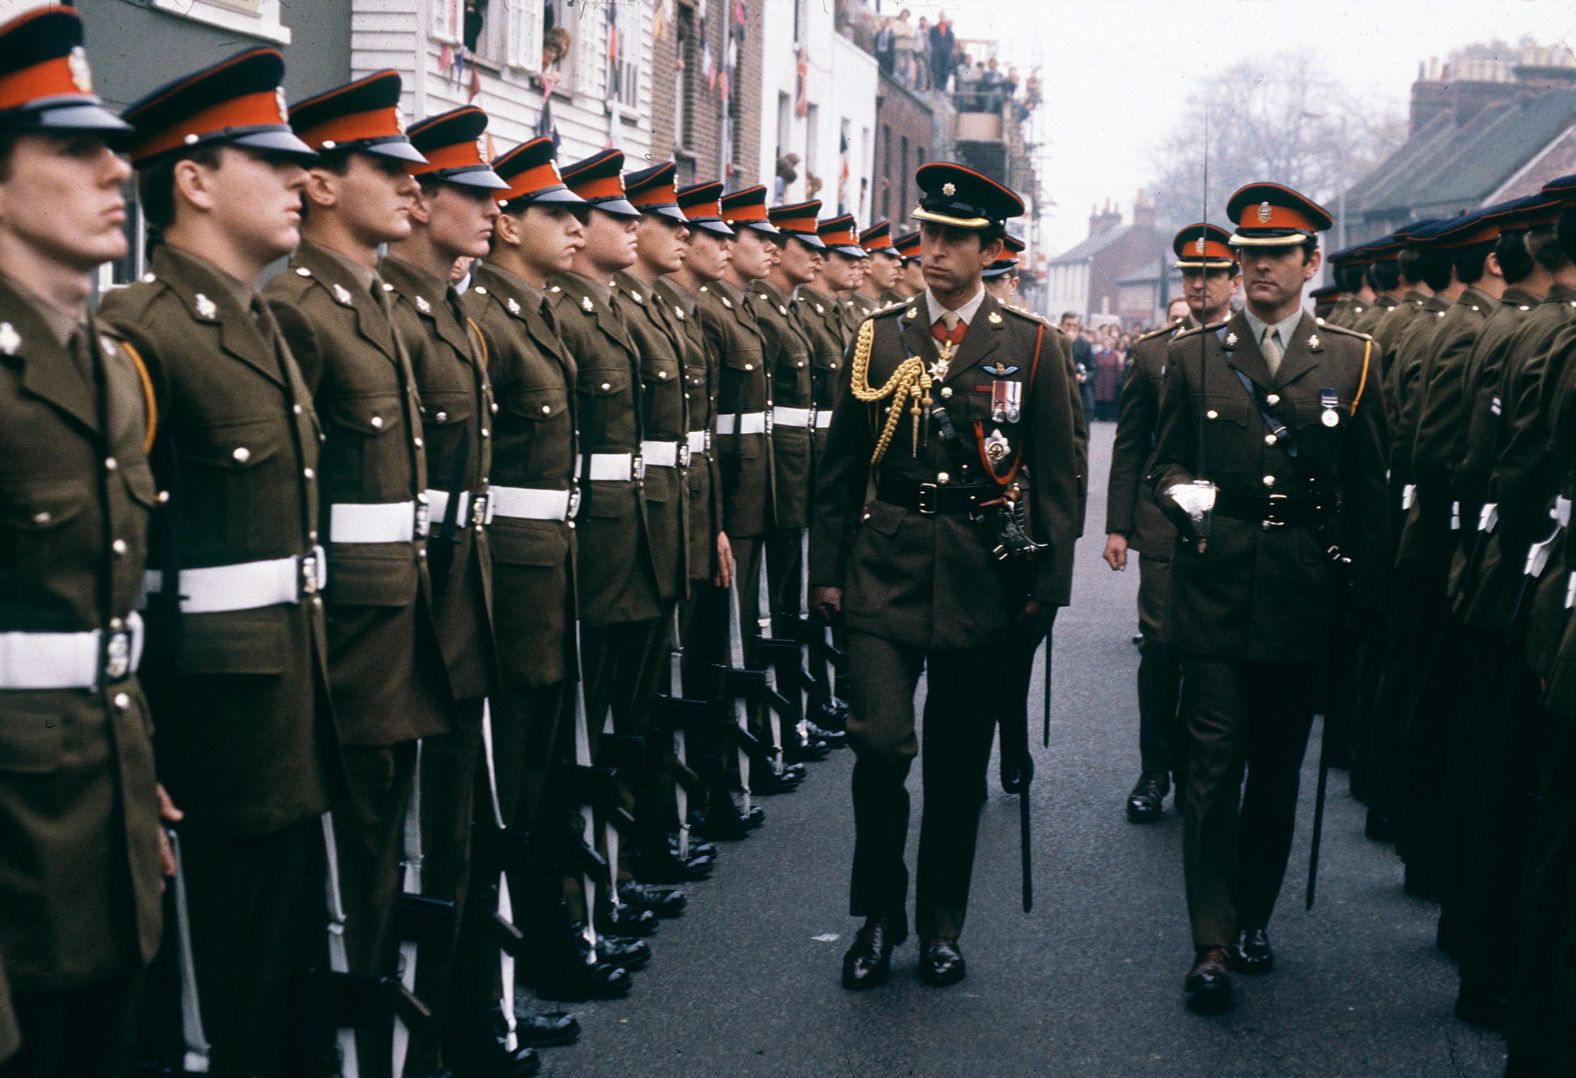 Charles, as colonel-in-chief, visits the Cheshire Regiment in Canterbury, England, in November 1978. He served in the Royal Navy from 1971 to 1976, and in 2012 his mother appointed him honorary five-star ranks in the navy, army and air force.